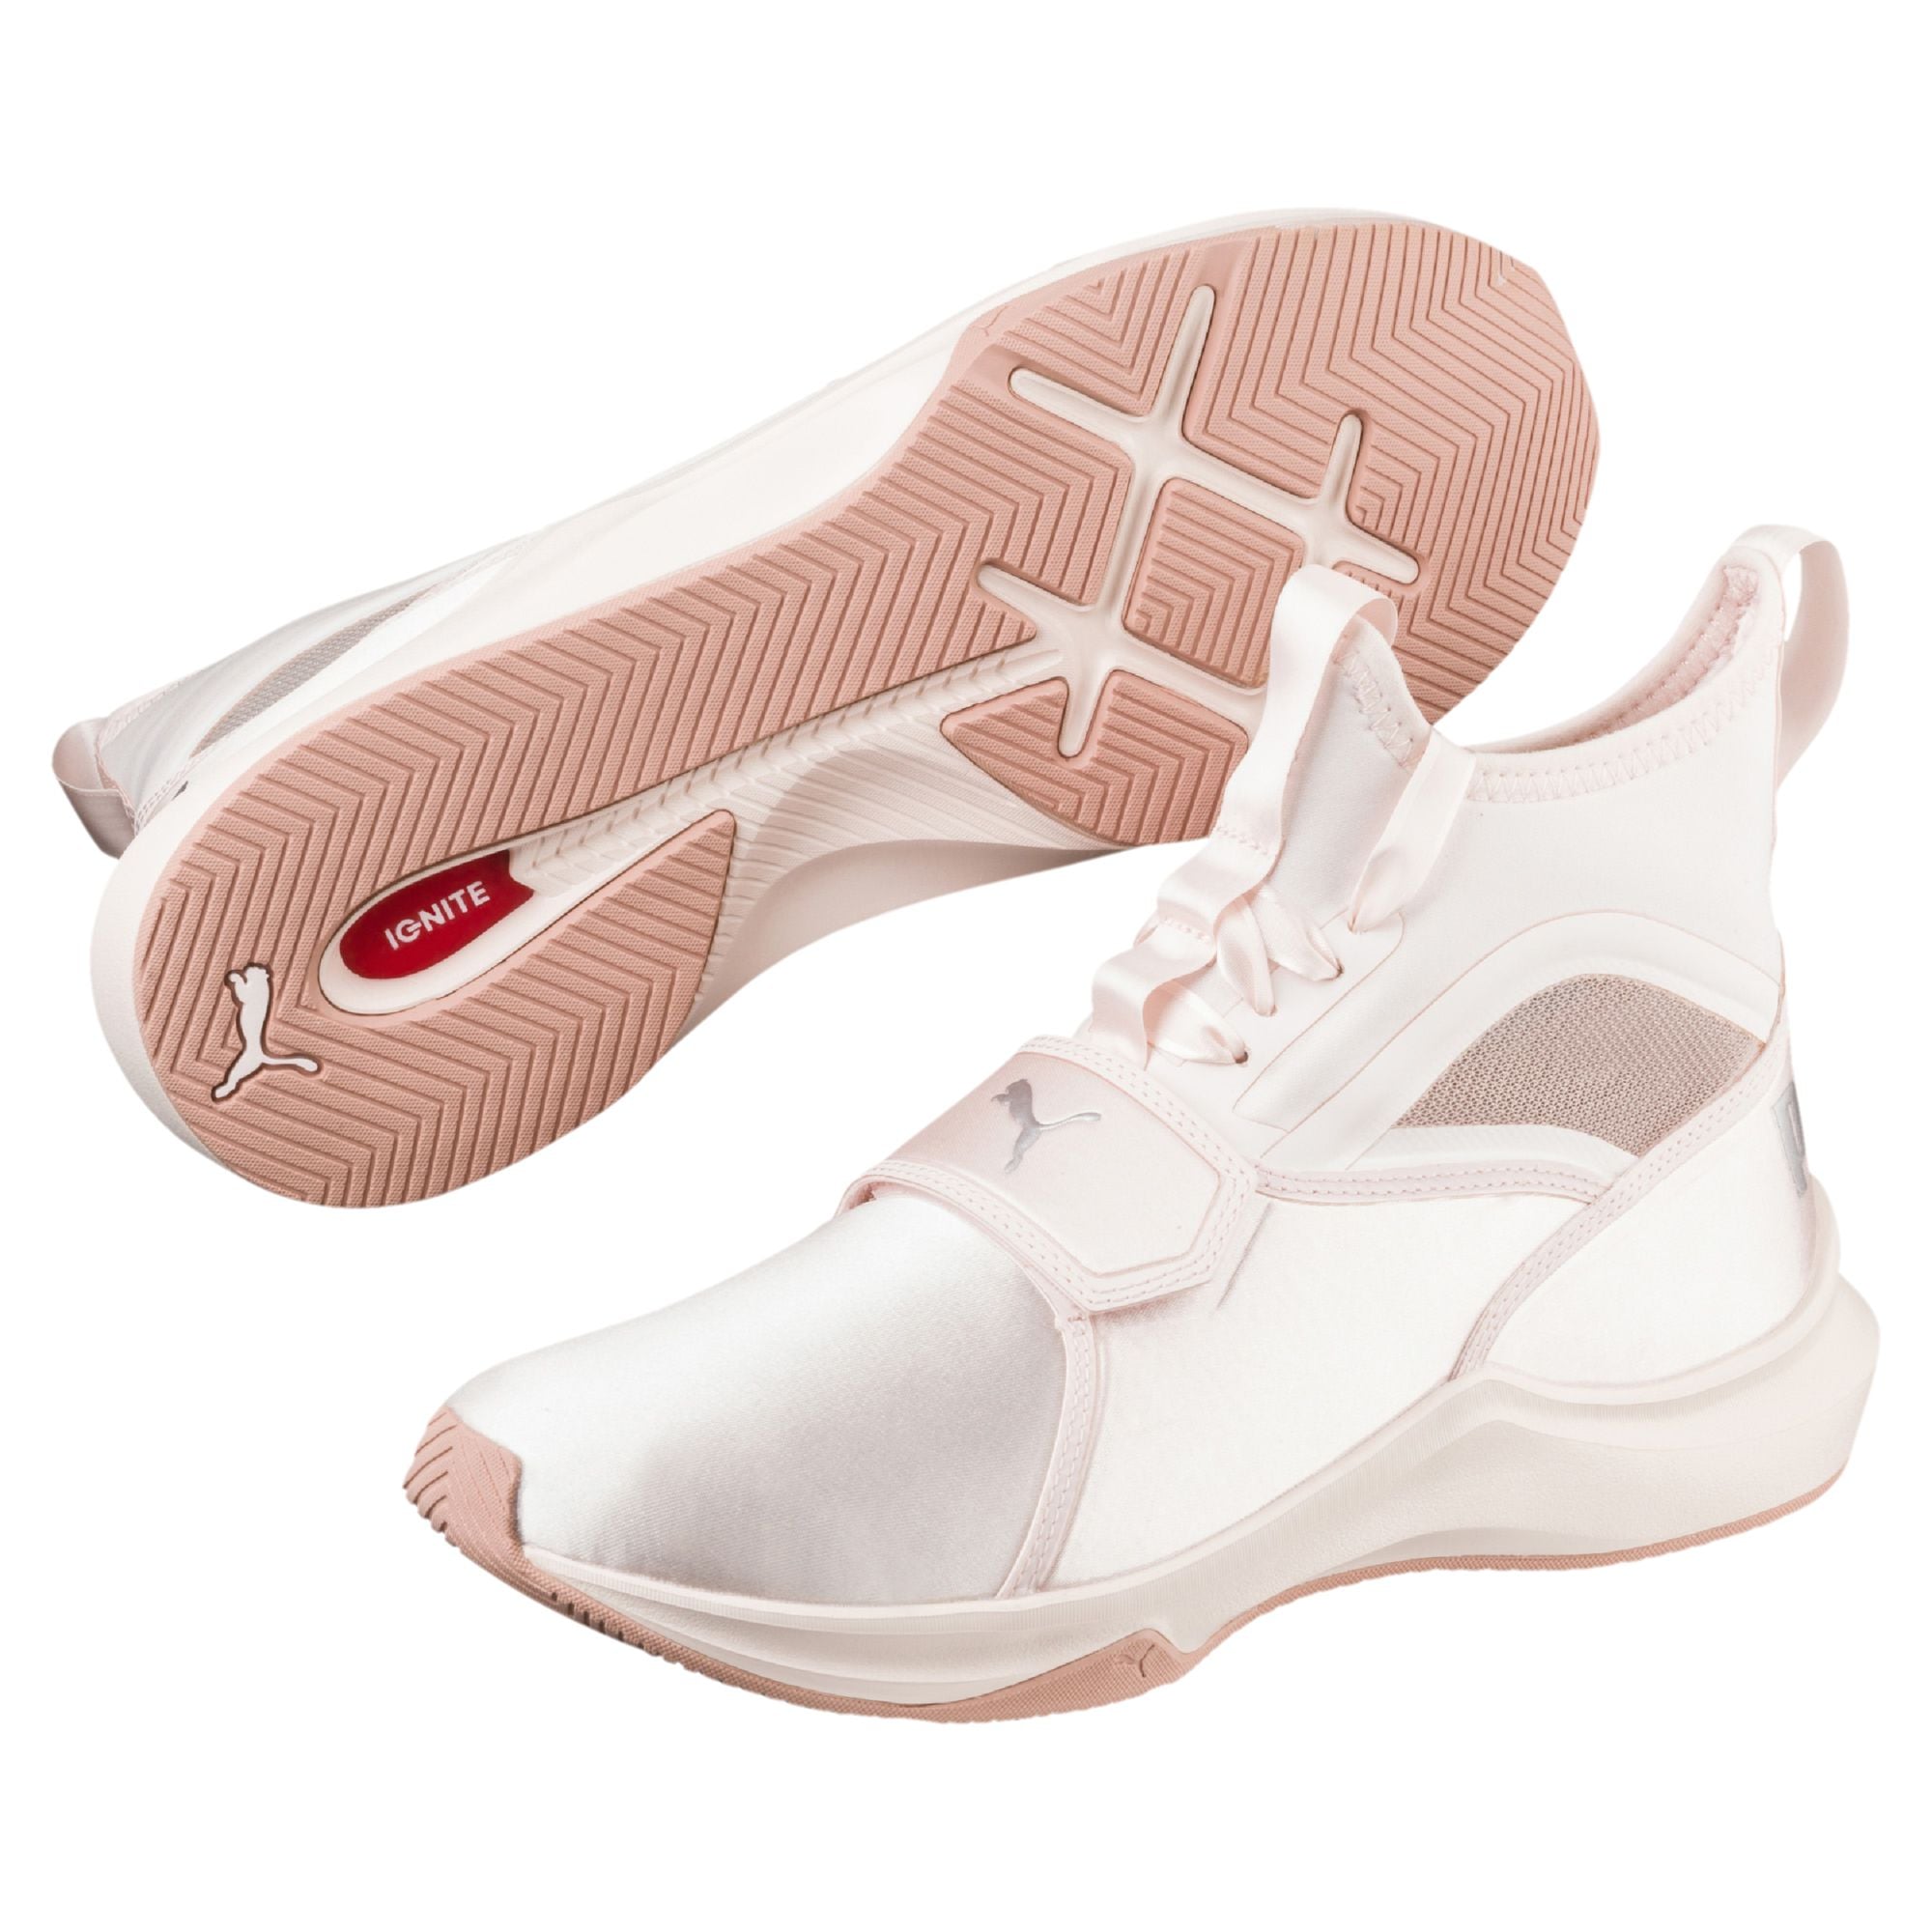 typist London Arrest Puma Phenom Satin EP Women's Training Shoes | Mother May I . . . Buy All of  These Spring Essentials? Good, 'Cause I'm Gonna | POPSUGAR Fashion Photo 13